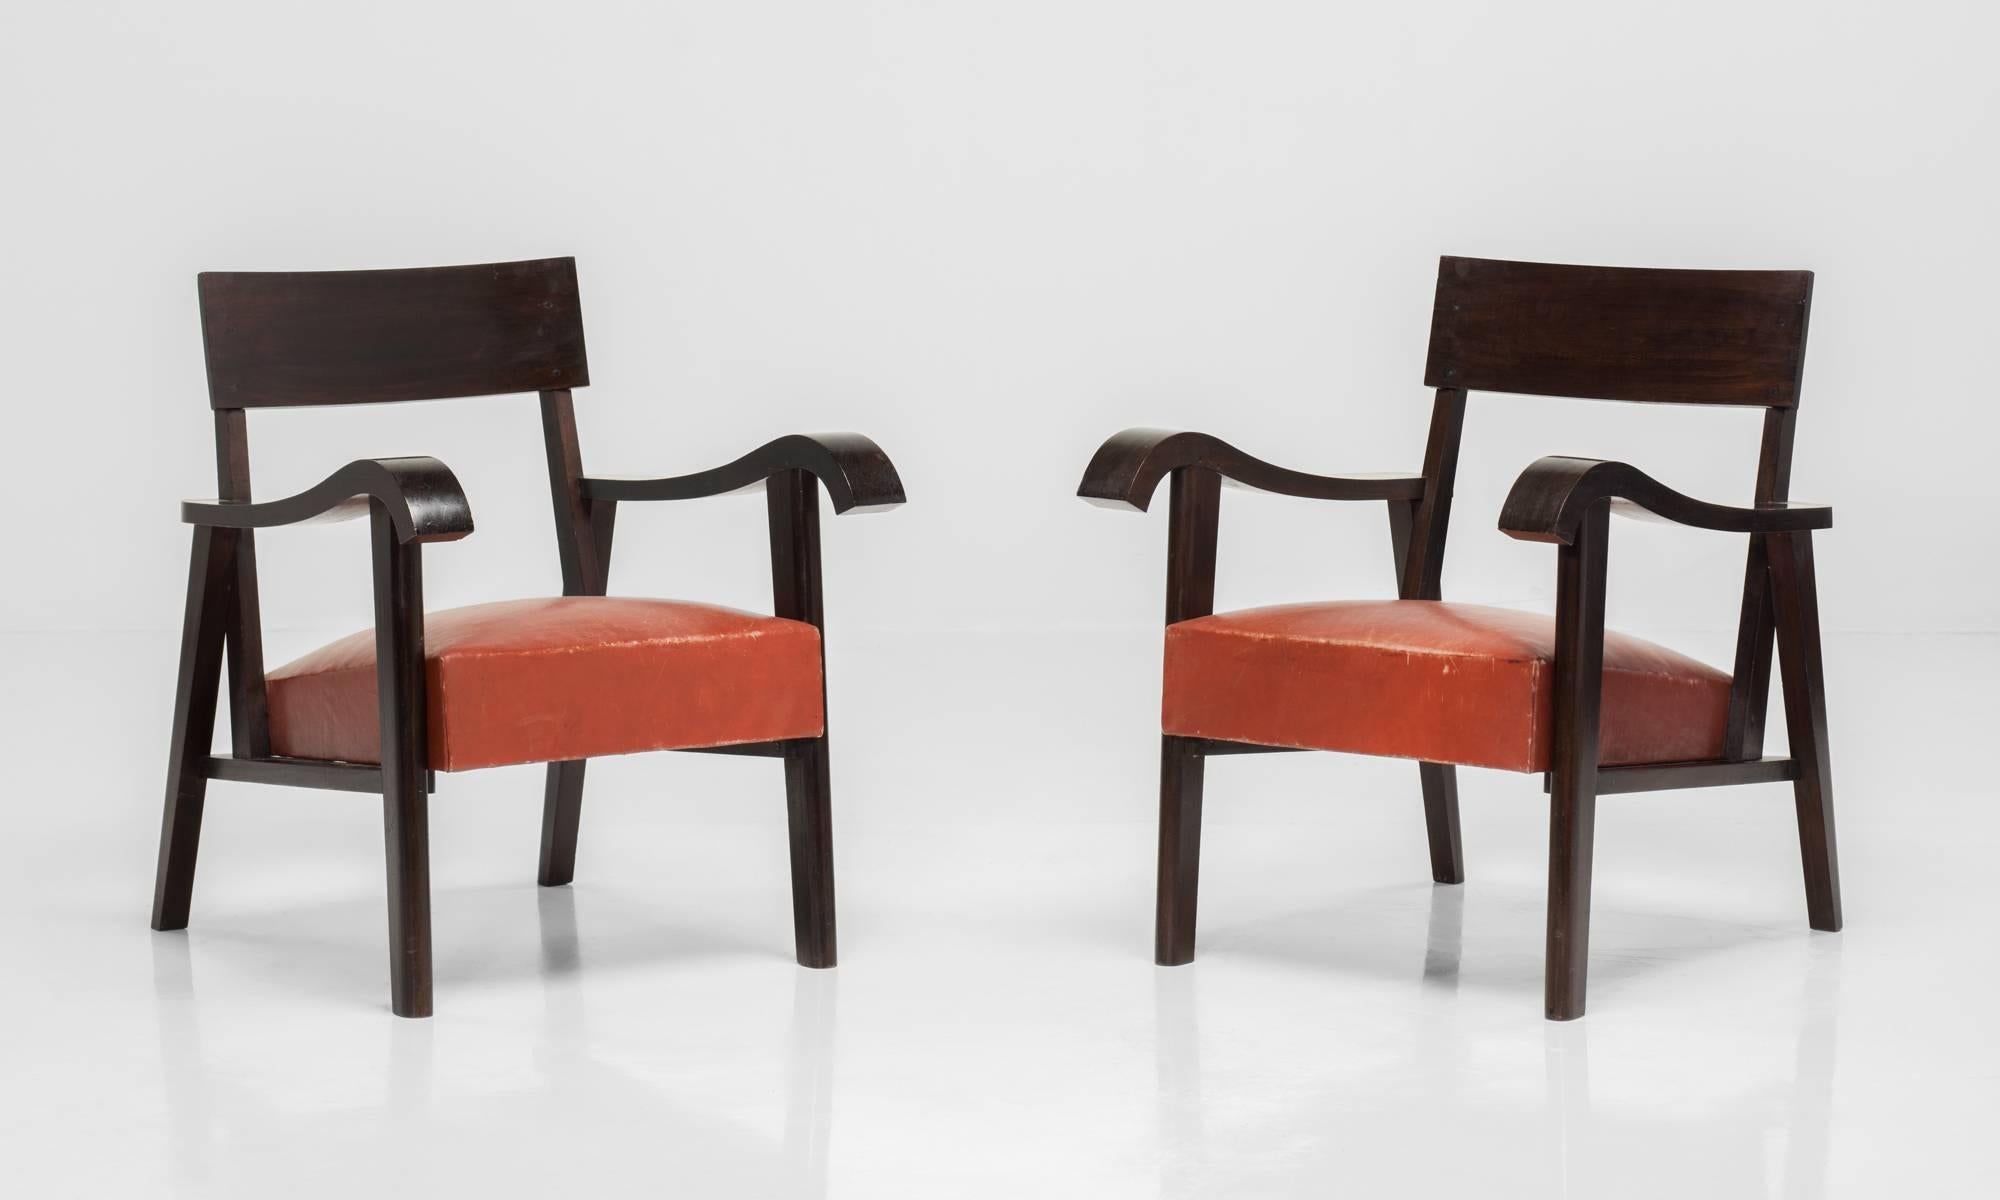 Pair of Wood Slab and Red Leather Armchairs, England, circa 1940

Elegant forms with substantial weight and original leather upholstery.